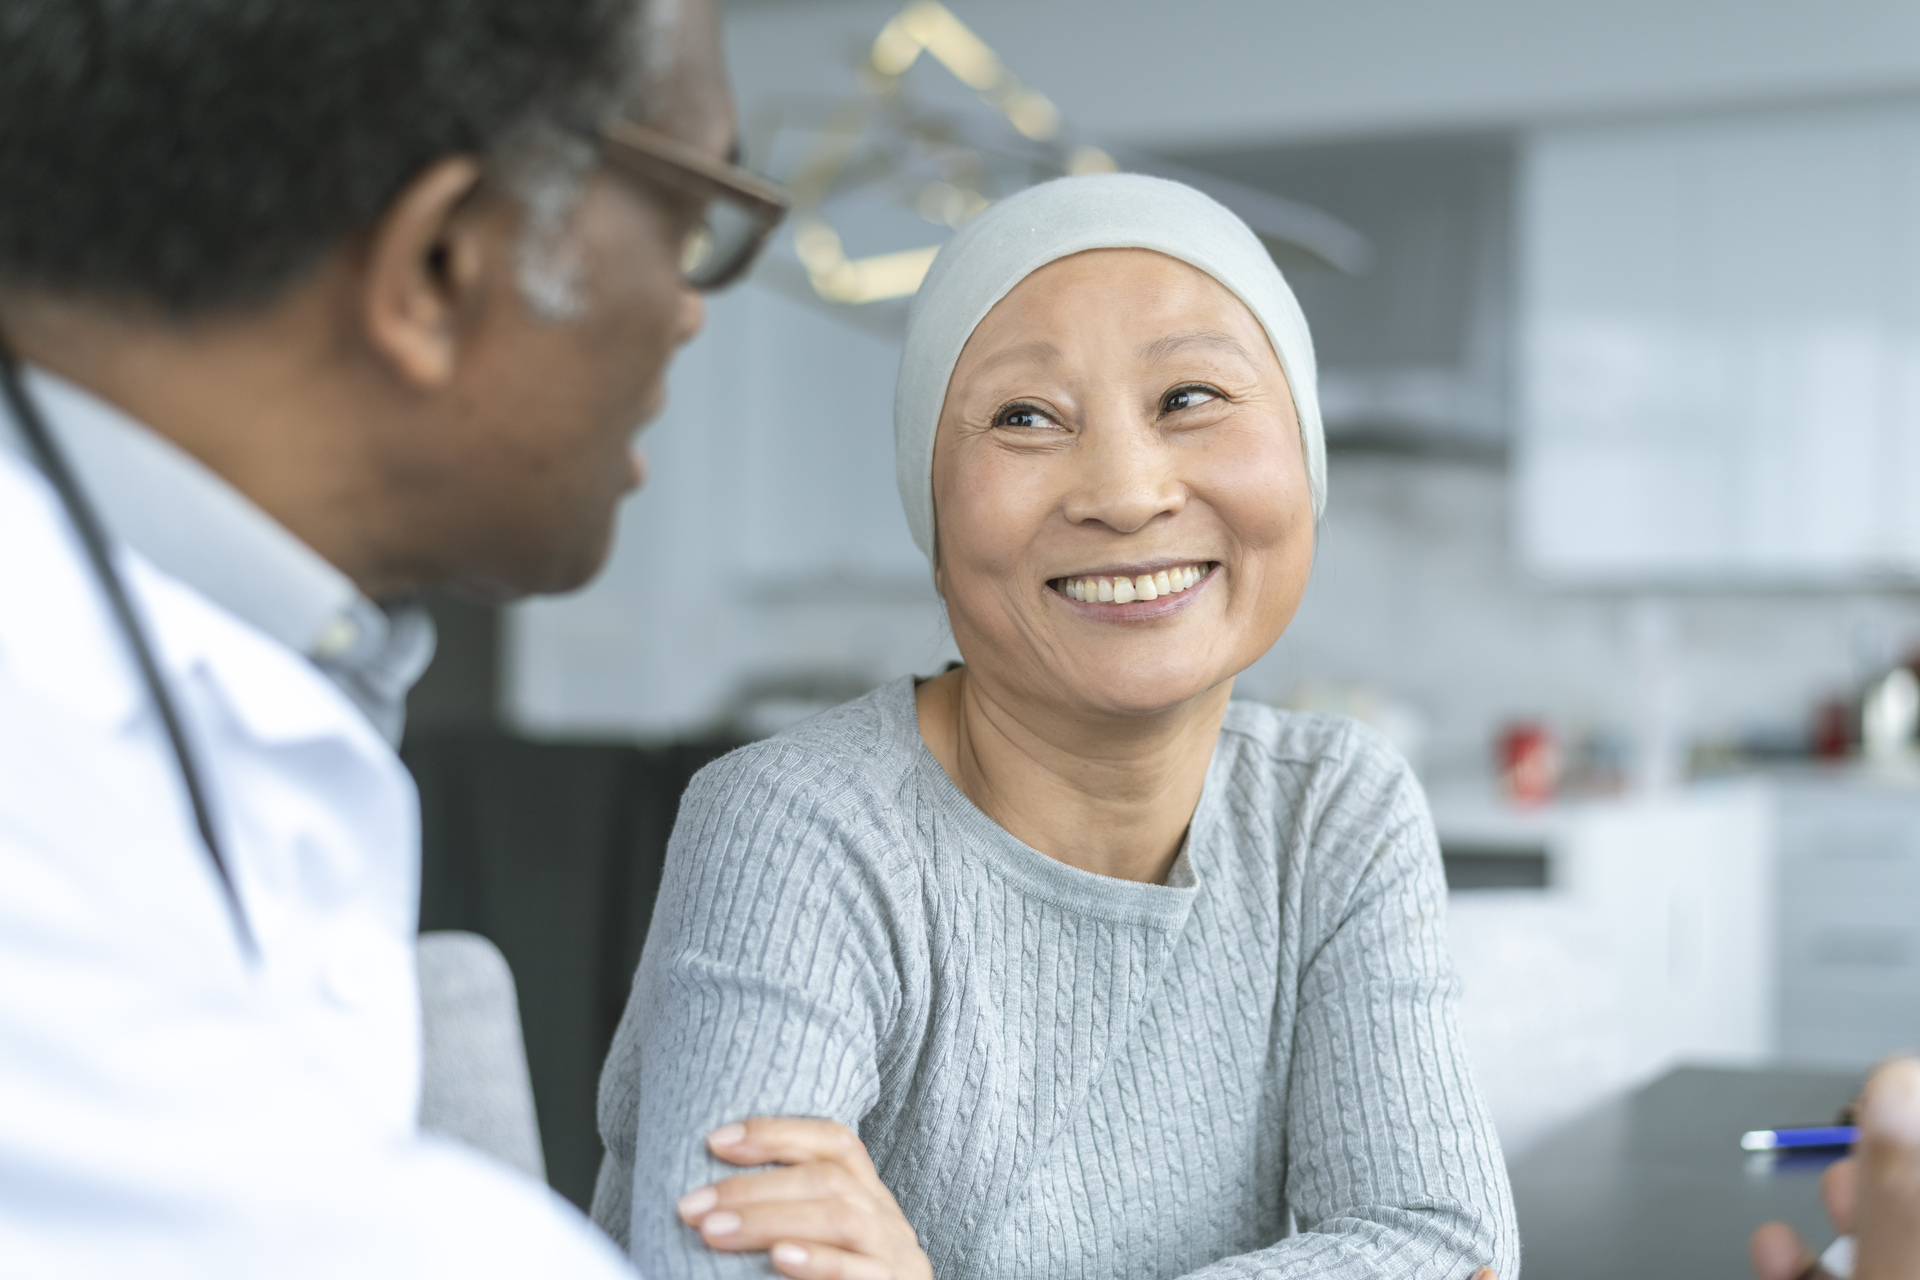 A Korean woman with cancer is meeting with her doctor. Chemotherapy treatment is going well. The patient is smiling at her doctor as he shares with her positive news.